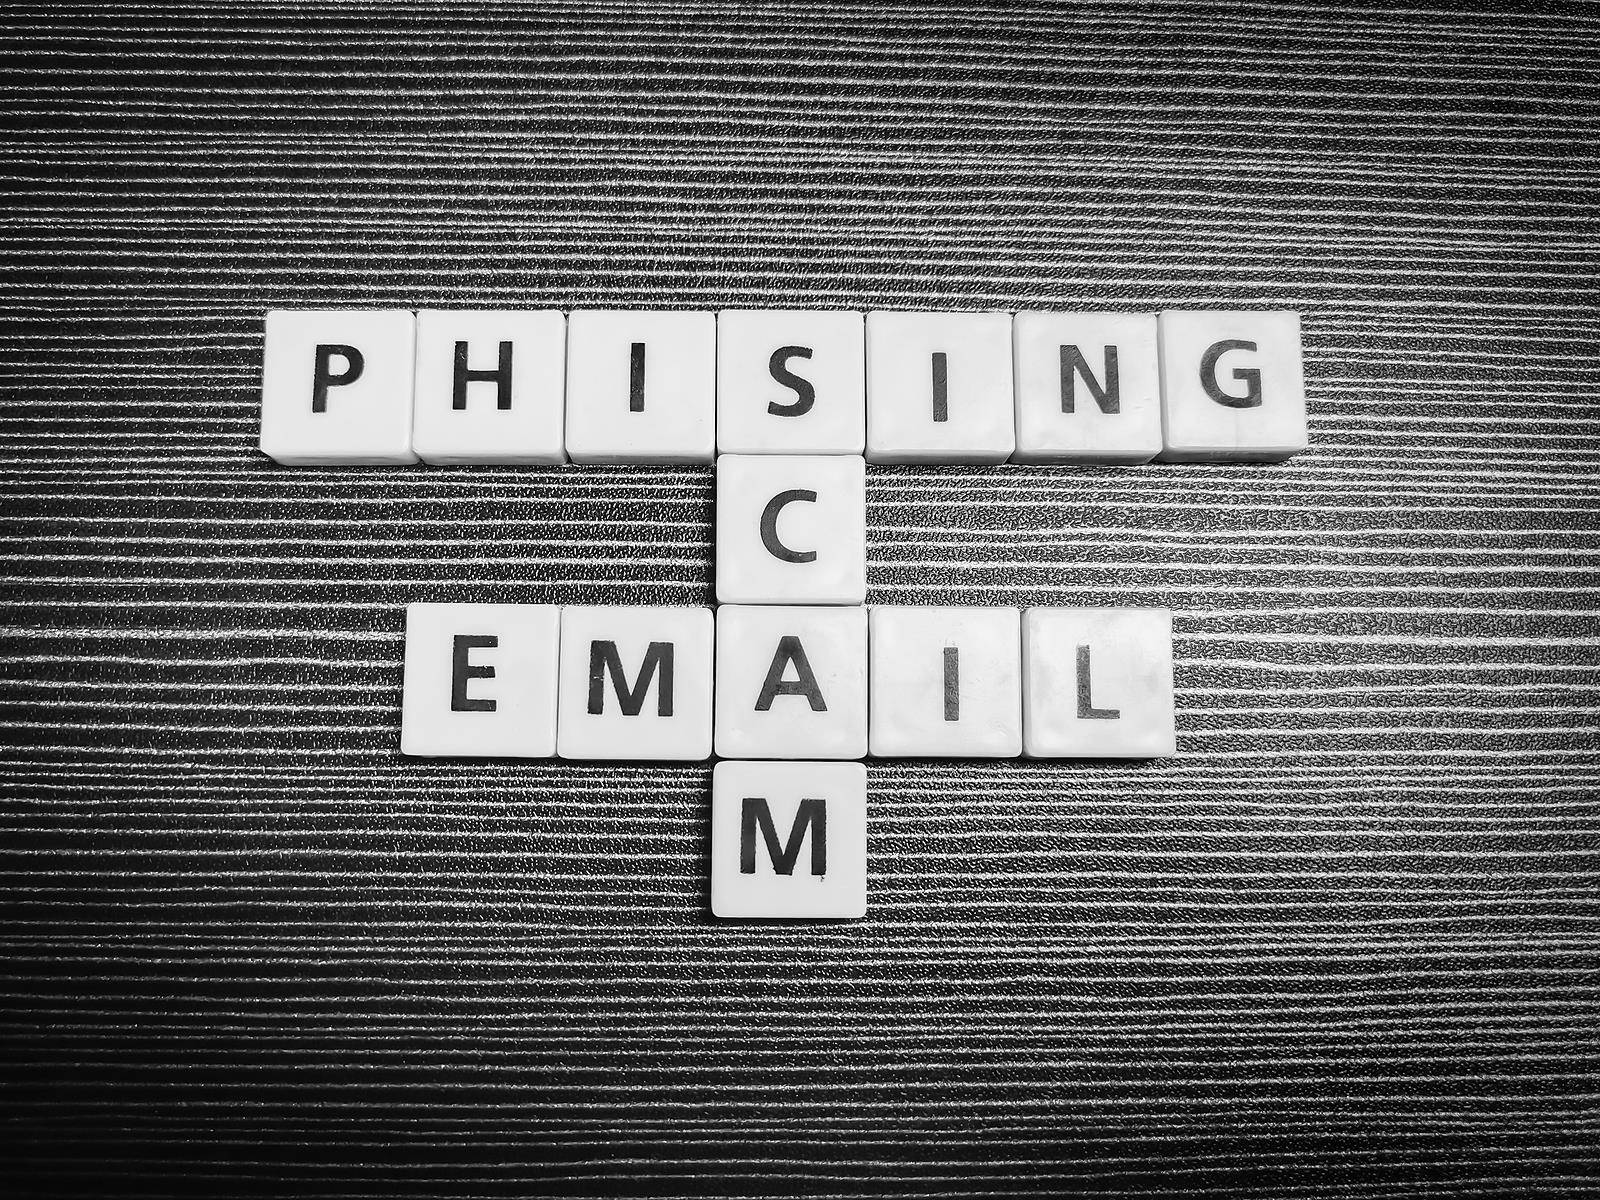 How To Recognize Email Phishing Scams 2